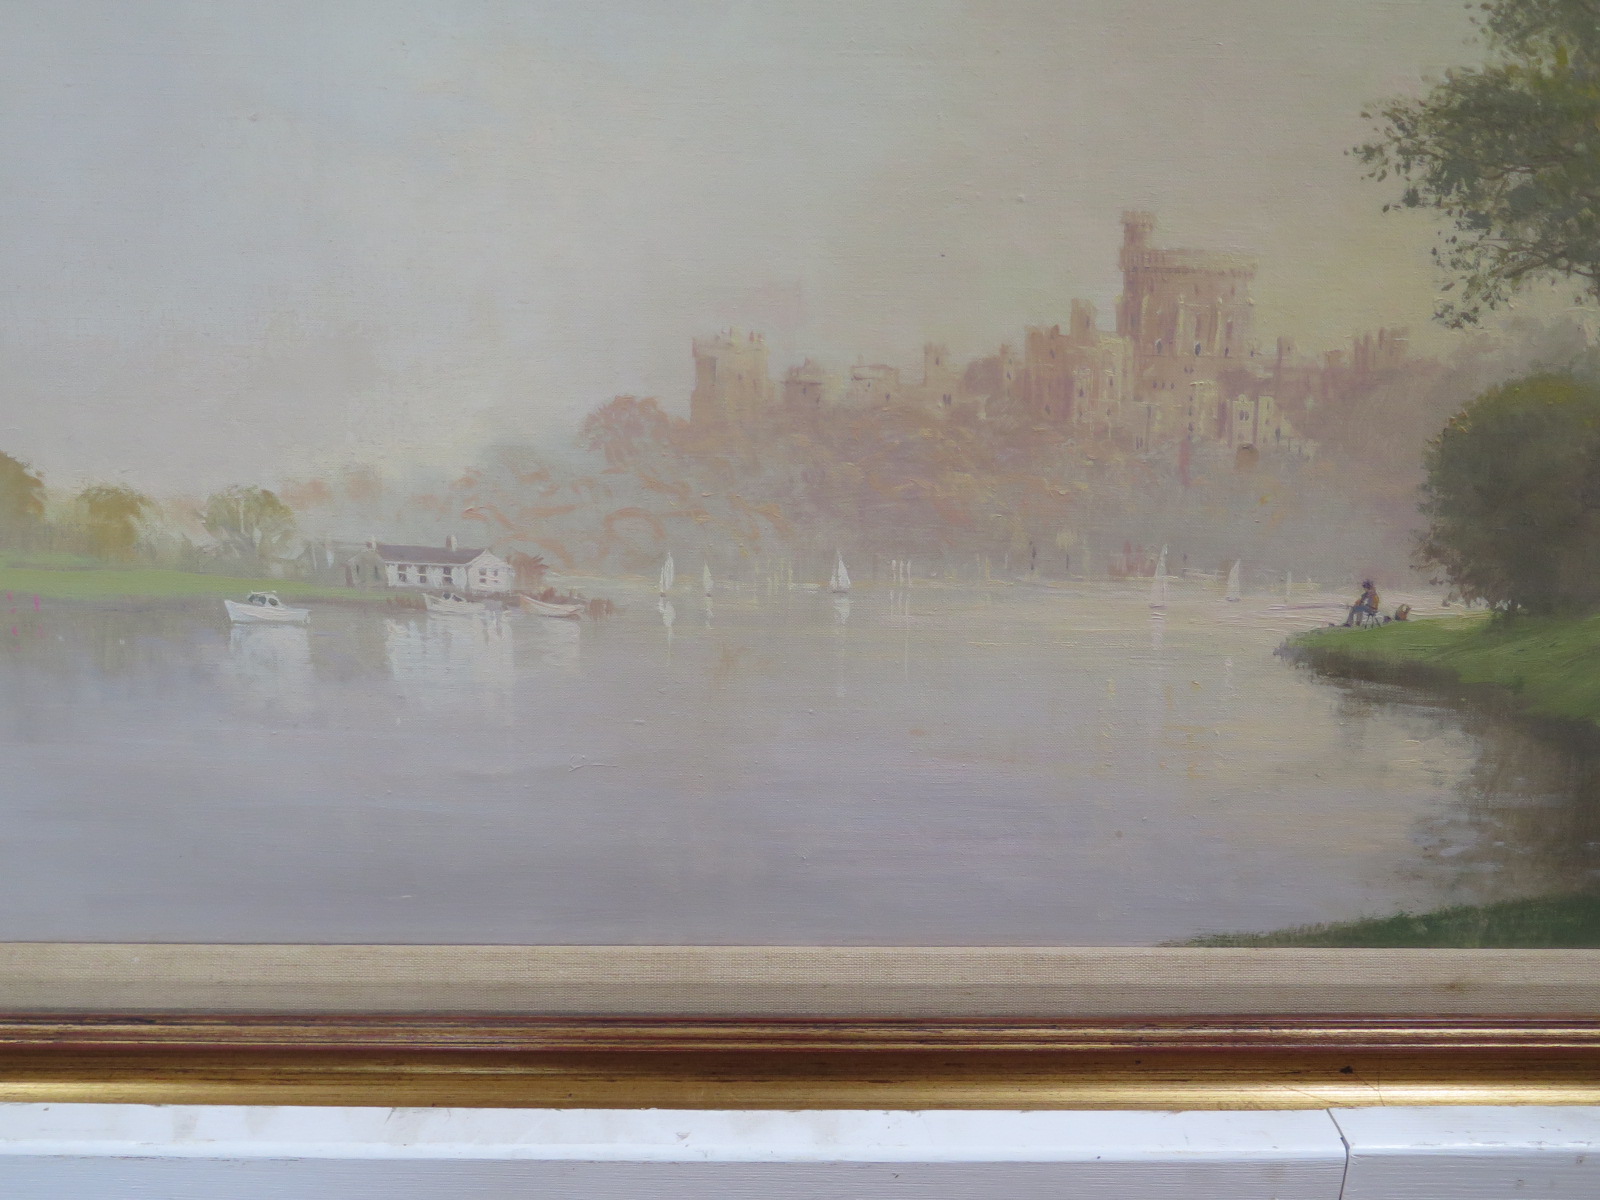 "Windsor Castle" by John Miller - Cornish artist, oil on canvas 58x90cm - generally good condition - Image 2 of 3